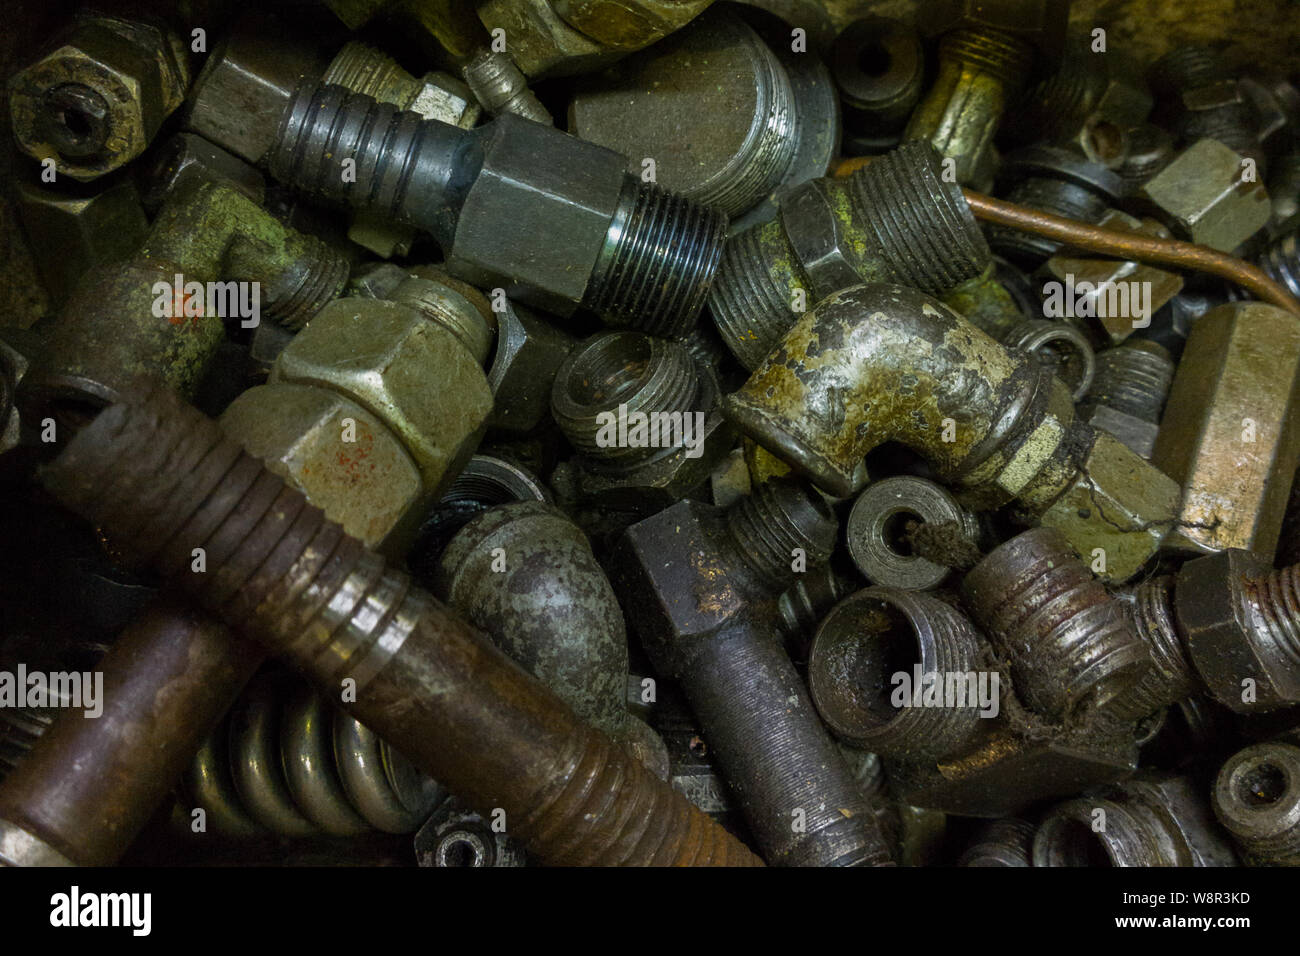 a pile of old dirty hydraulic fittings and tube parts closeup with selective focus Stock Photo